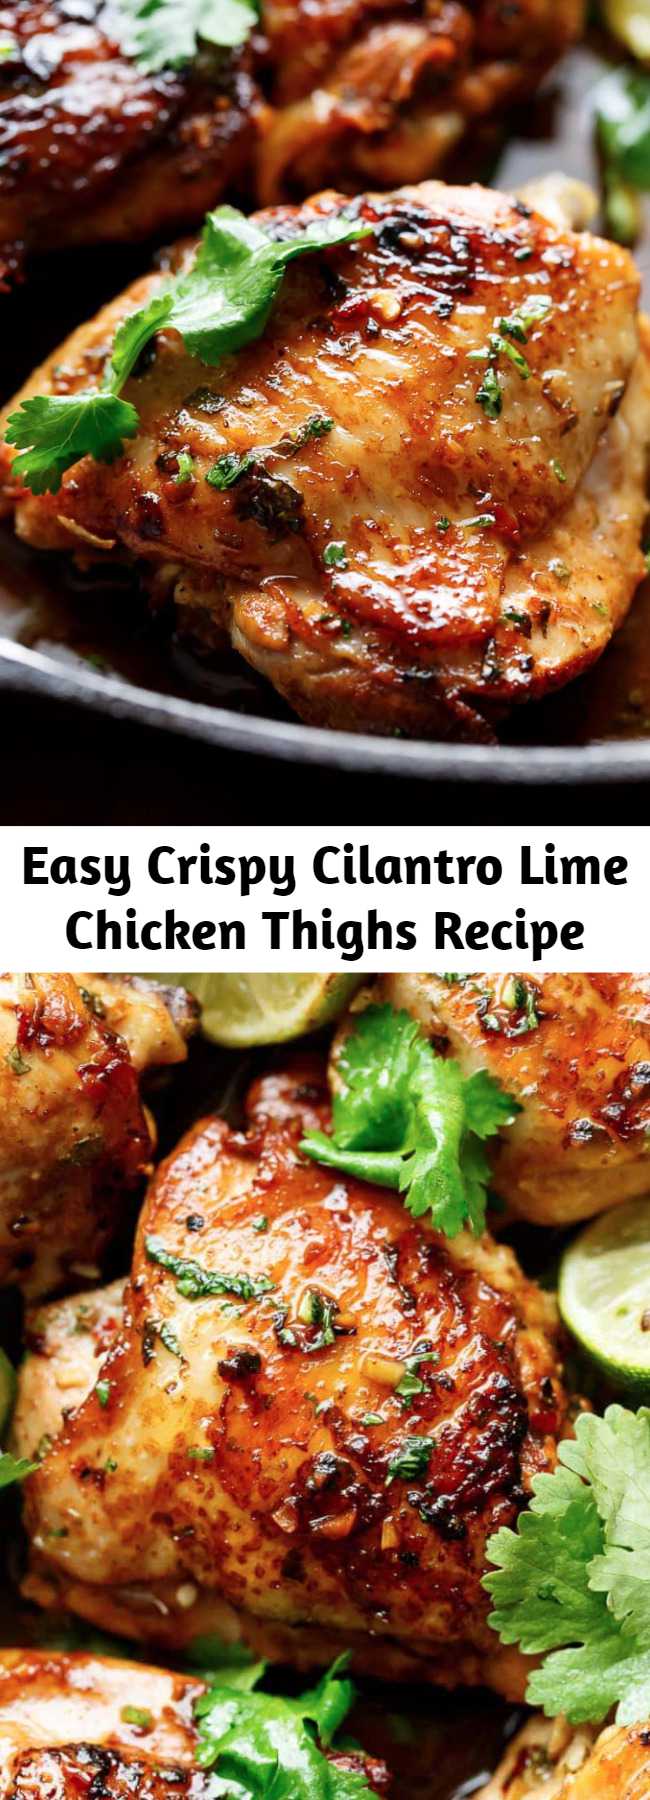 Easy Crispy Cilantro Lime Chicken Thighs Recipe - Cilantro and lime is a classic duo that we can't get enough of. You won't be disappointed. #easy #recipe #cilantro #lime #chicken #dinner #skillet #garlic #cumin #chickenthighs